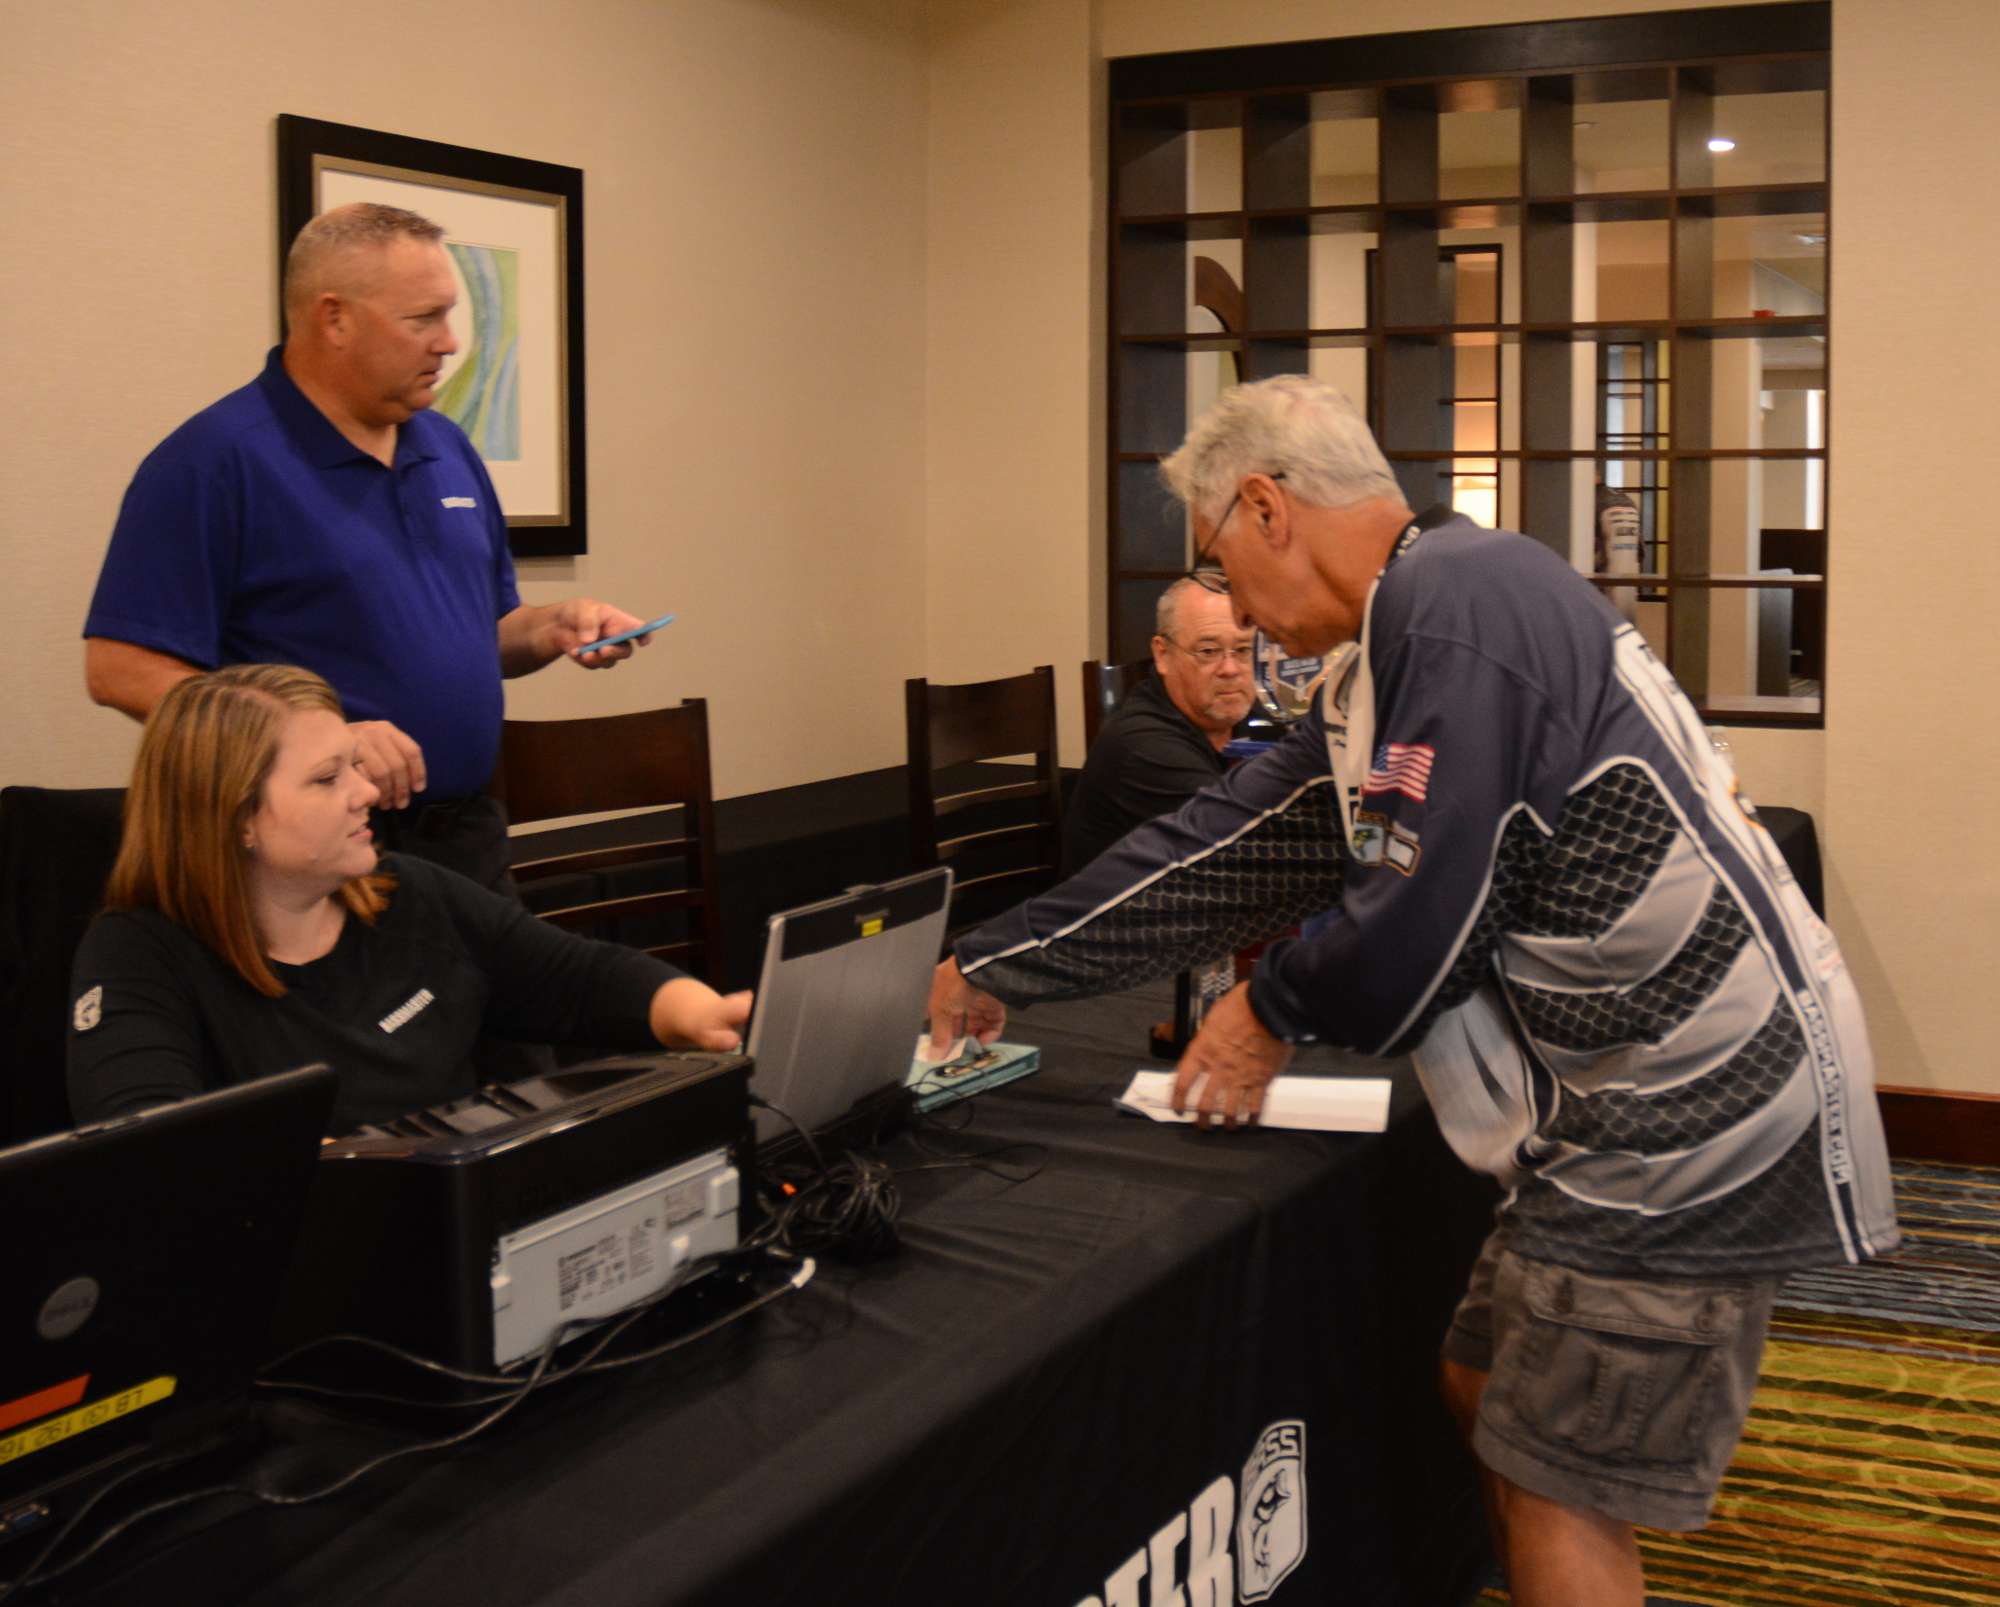 The tournament crew gets set for registration at the Holiday Inn Express in Hartford, Conn.